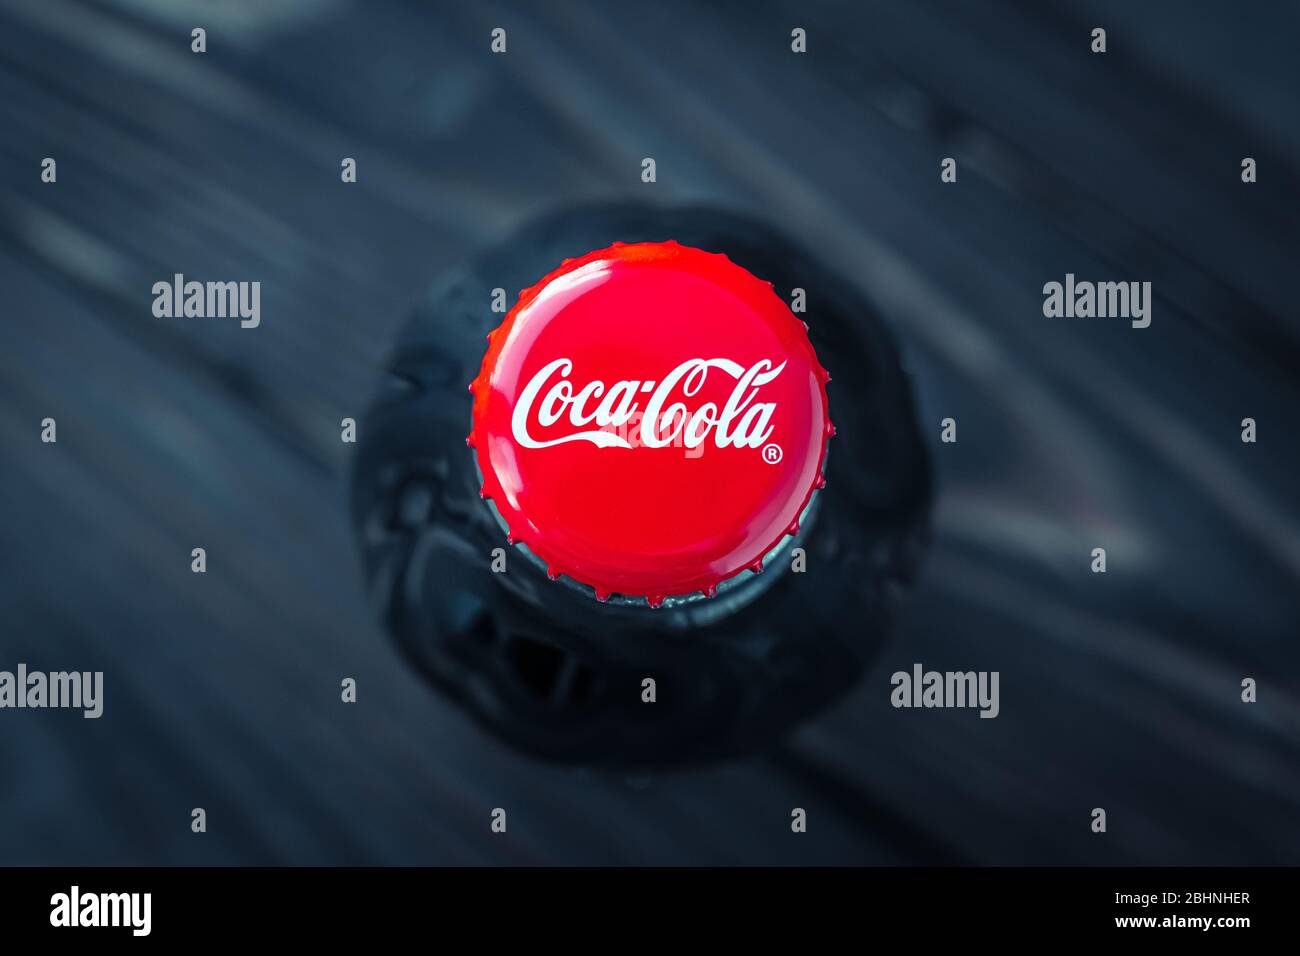 Kharkiv, Ukraine, April 26, 2020: A glass bottle of coca-cola on dark background. Close-up red cork of drink, top view. Illustrative editorial Stock Photo